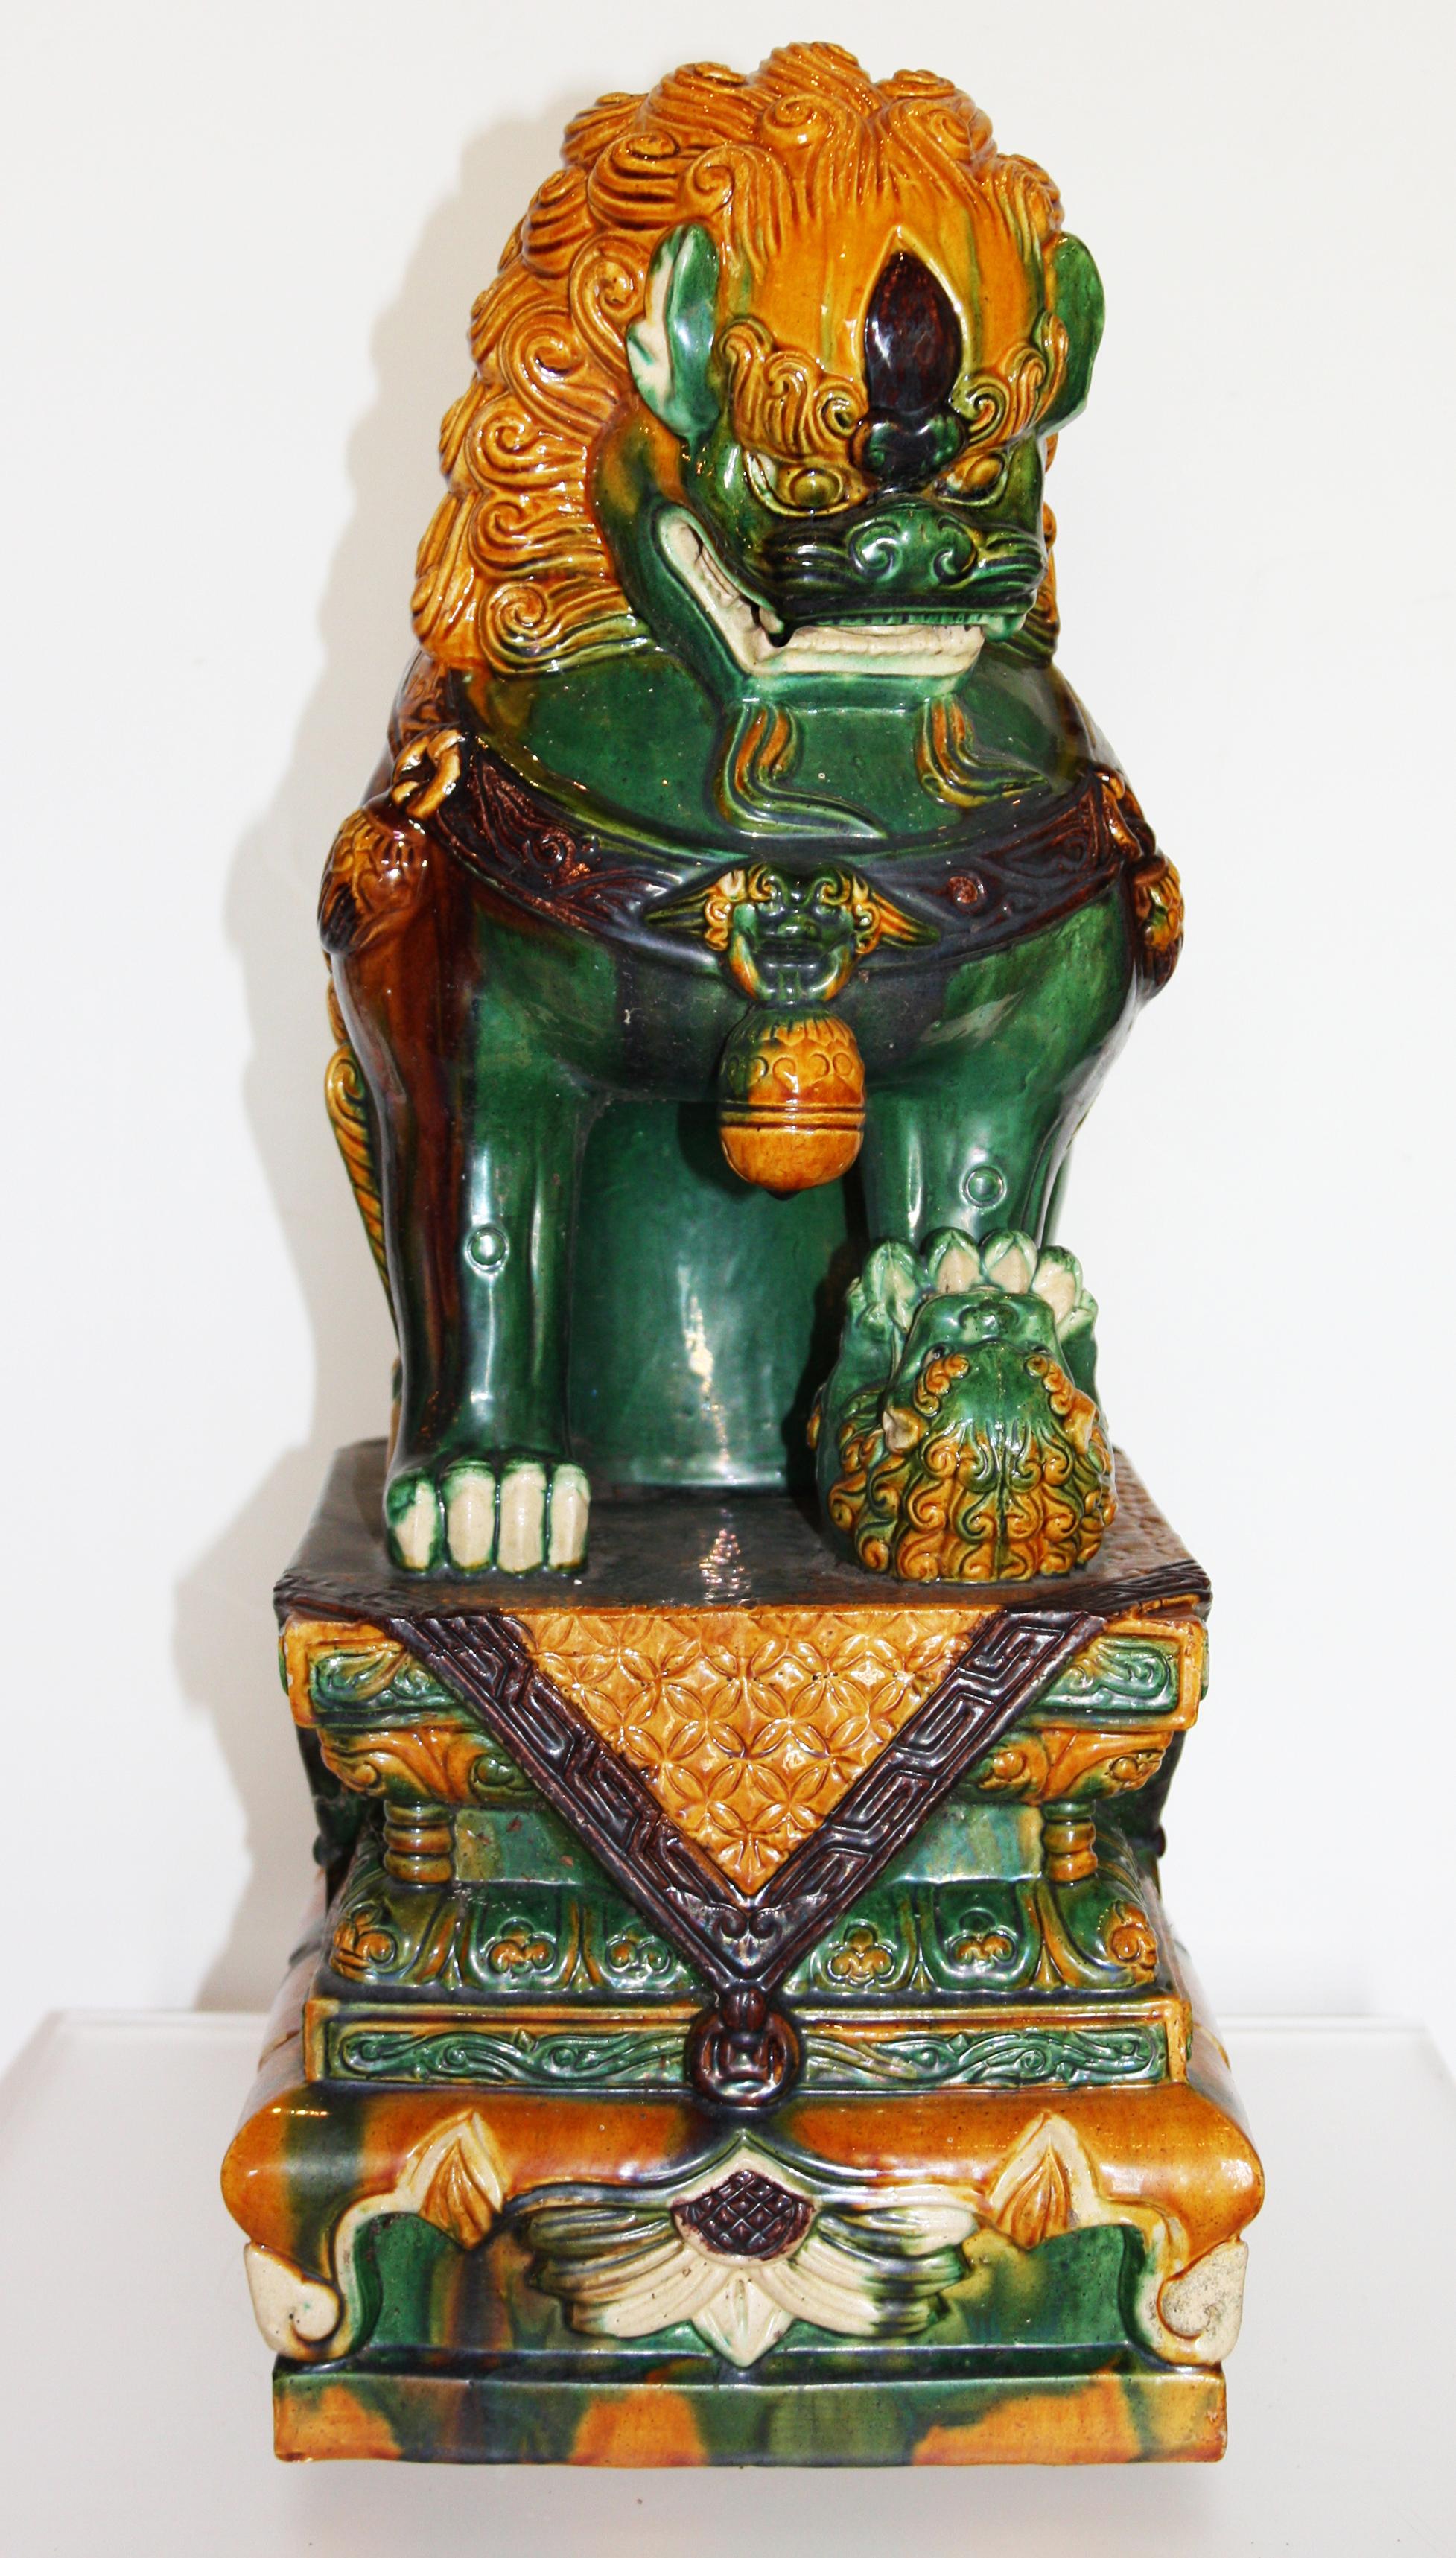 Pair of green and gold Chinese Sancai glazed foo dogs. The pair of dogs are sitting on platforms with their teeth bared. 


Dimensions given are for one dog.